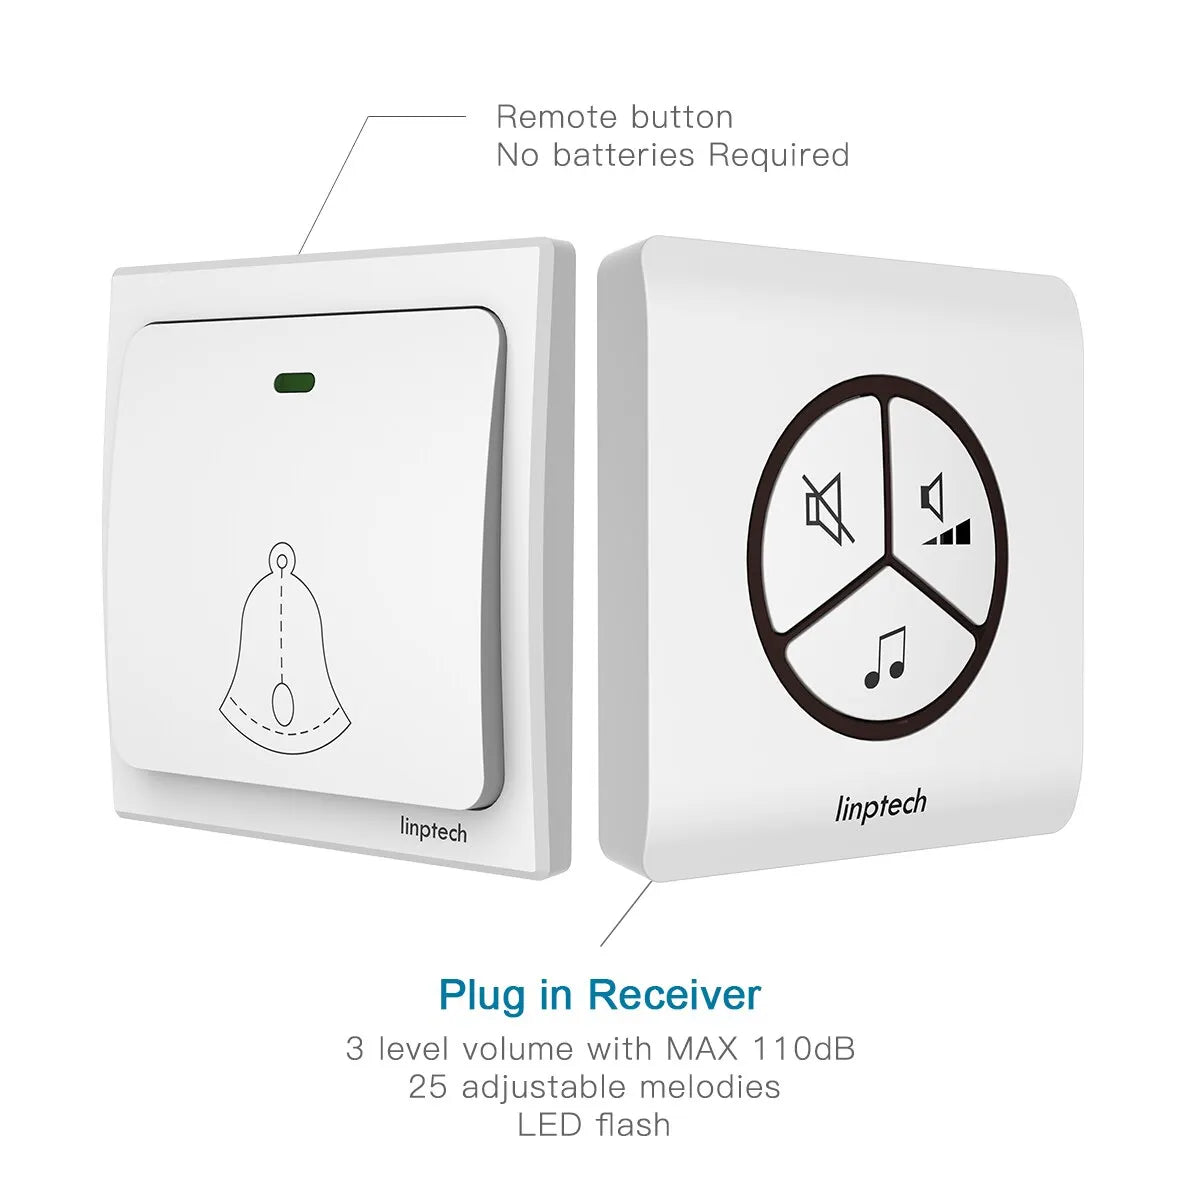 Linptech Self-Powered Wireless Doorbell G1,3 Level Volume with 105dB Loud Chime,IPX5 Waterproof,One Push Mute,Relay & Expandable